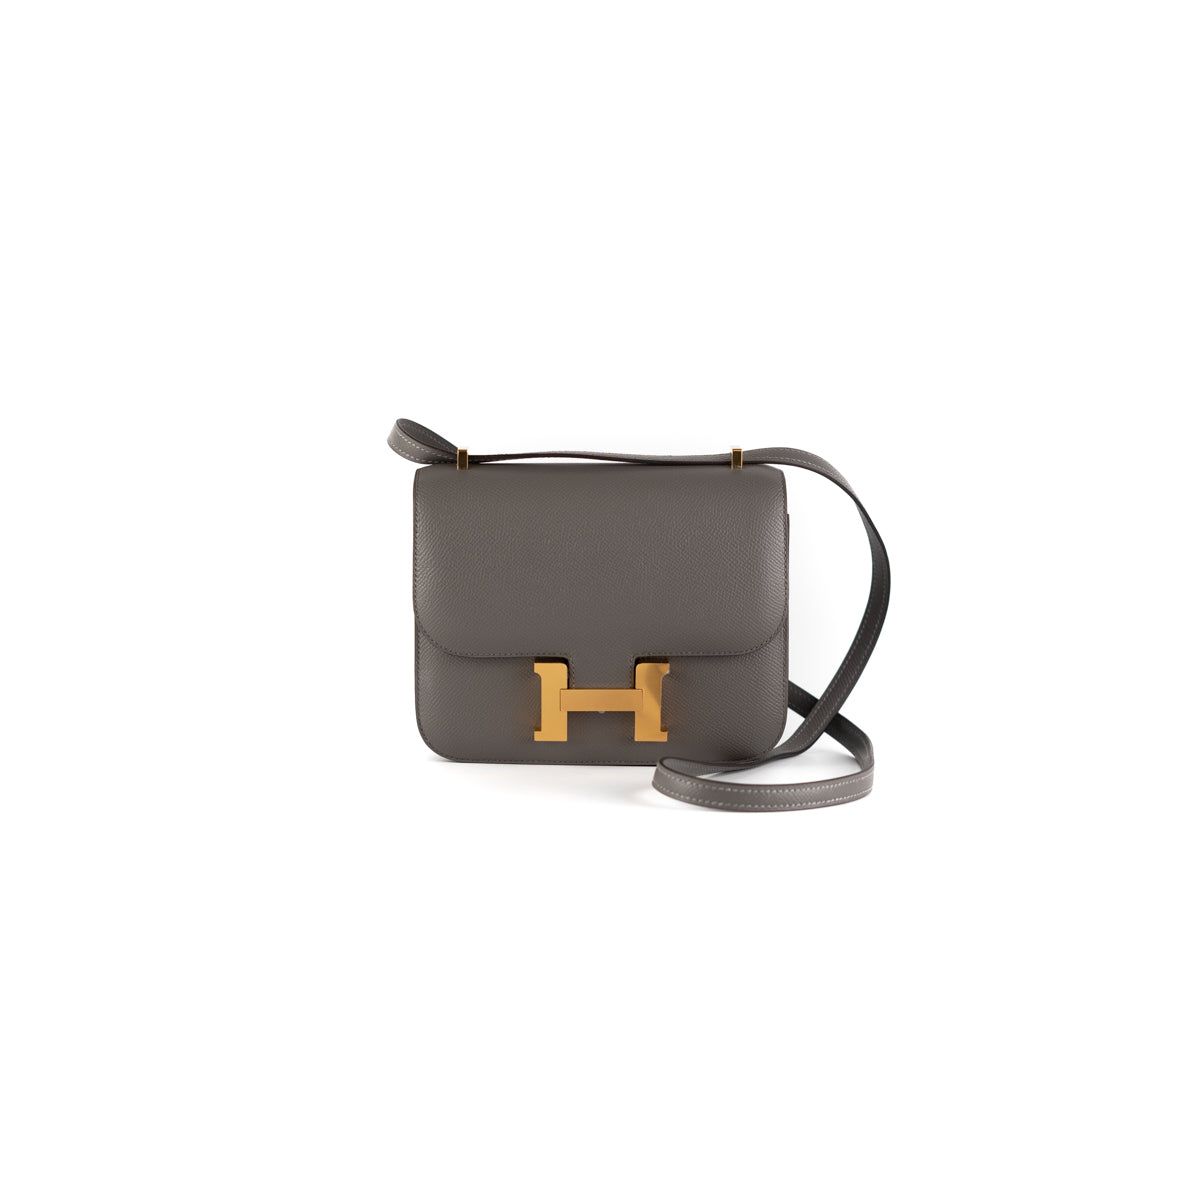 Selling this brand new exotic Hermes Constance Mini (18) in Gris Meyer  TikTok